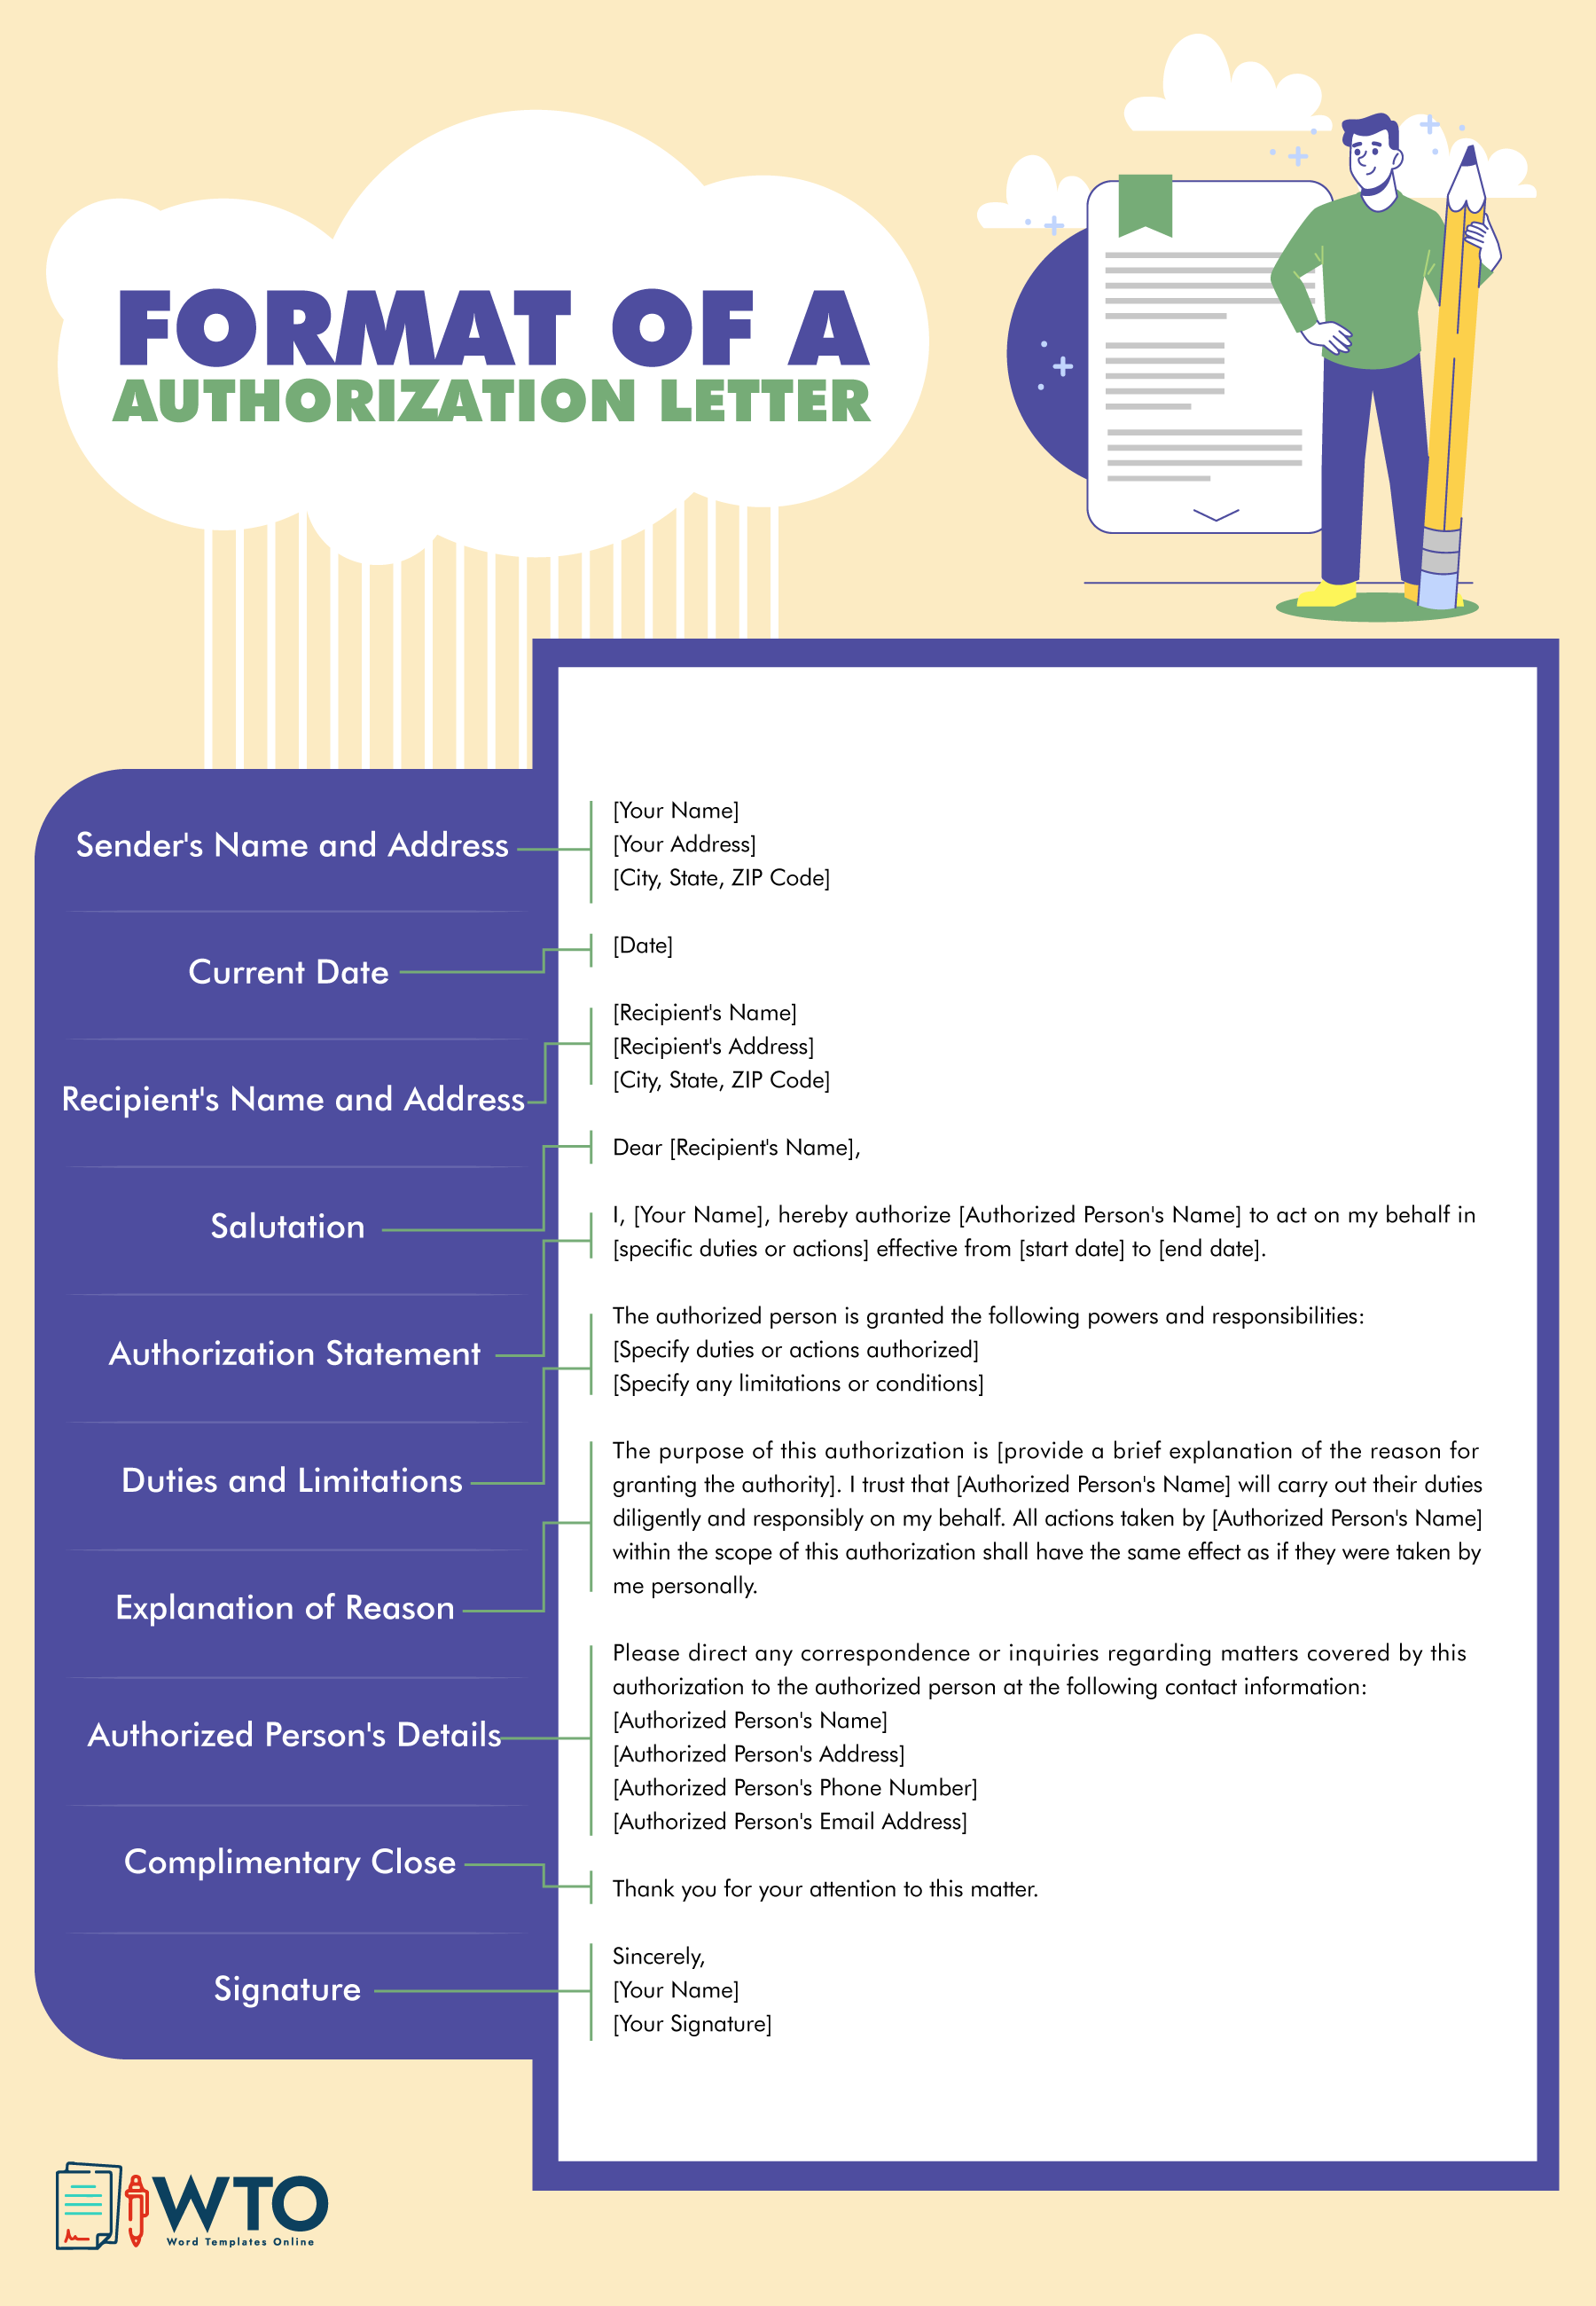 Infographic explaining format of an authorization letter